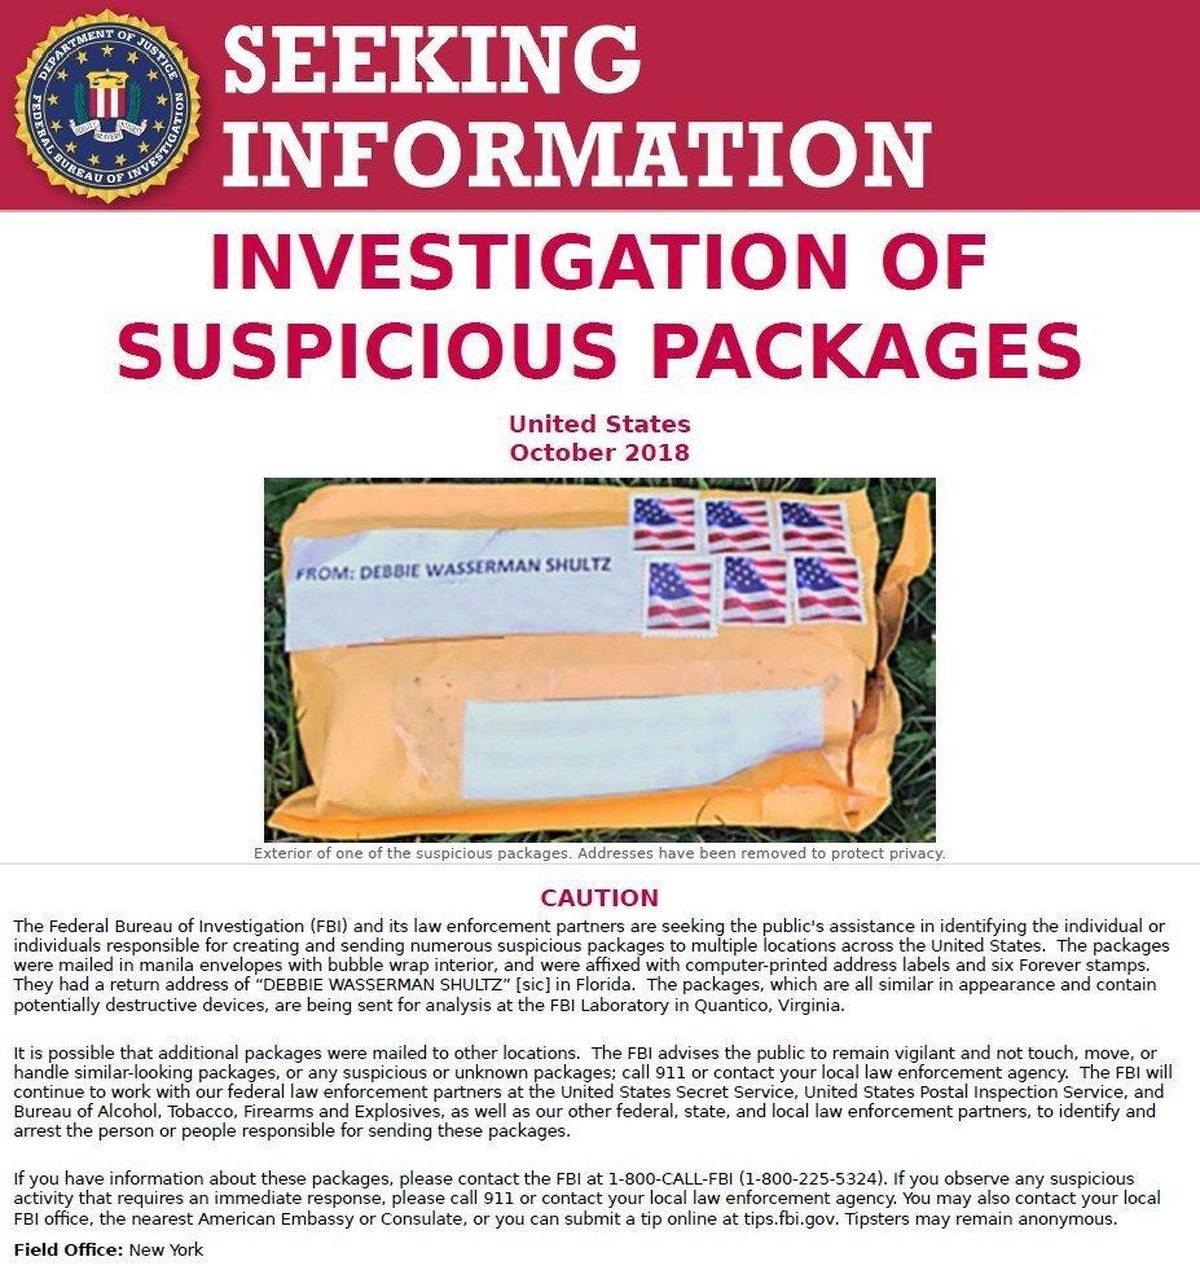 The FBI released this poster on Thursday, Oct. 25, 2018, asking for the public’s assistance in finding the people responsible for sending suspicious packages to multiple locations across the United States. The targets of the packages were some of the figures most frequently criticized by President Donald Trump. (Associated Press)